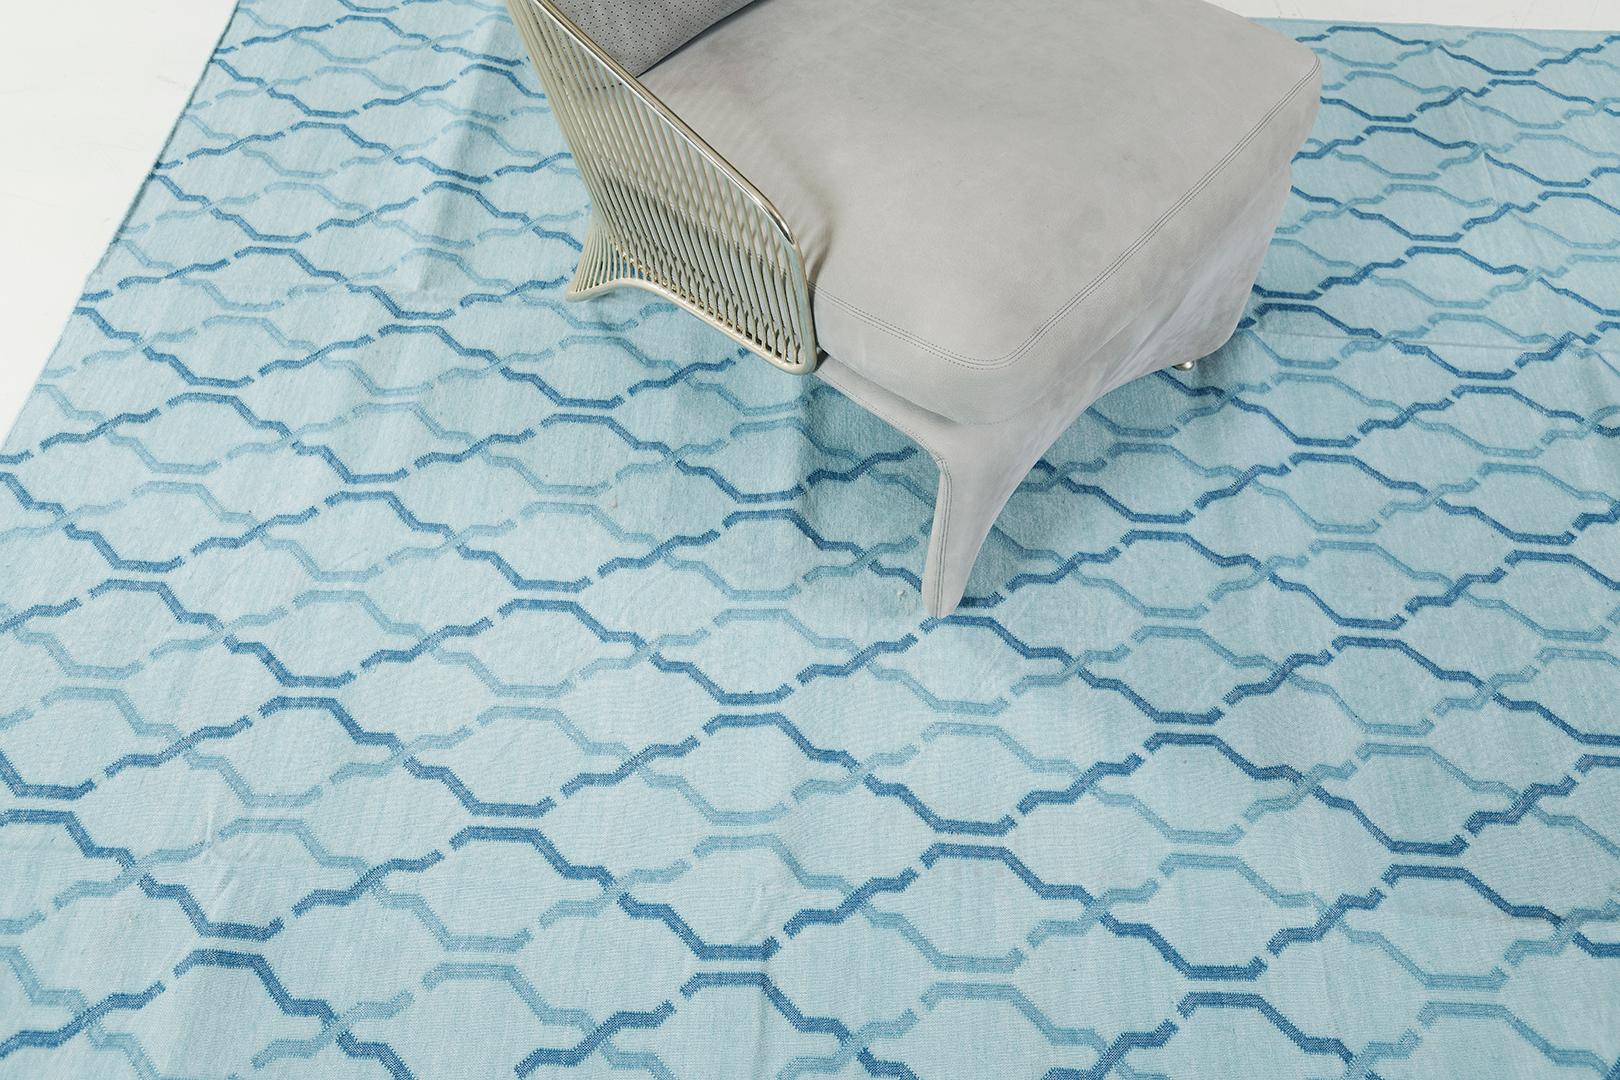 Zenia’ in Turquoise is a contemporary flat weave rug that is an epitome of cozy sophistication. Featuring an all over elegant geometric pattern, this modern rug will definitely beguile every viewer’s artistic mind. Mehraban's Cielo collection is